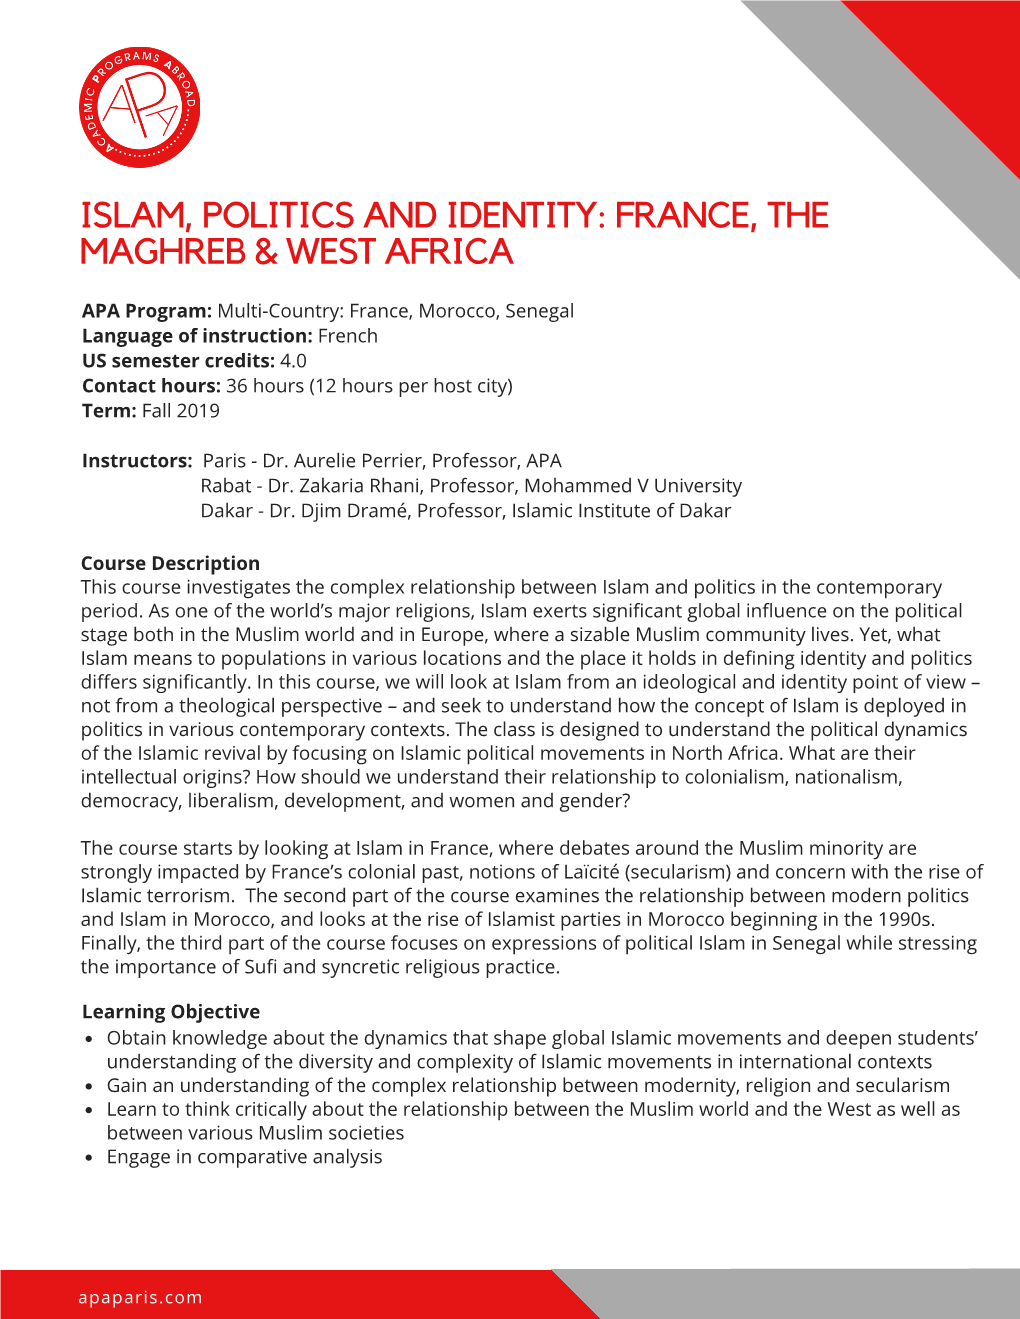 Islam, Politics and Identity: France, the Maghreb & West Africa Syllabus